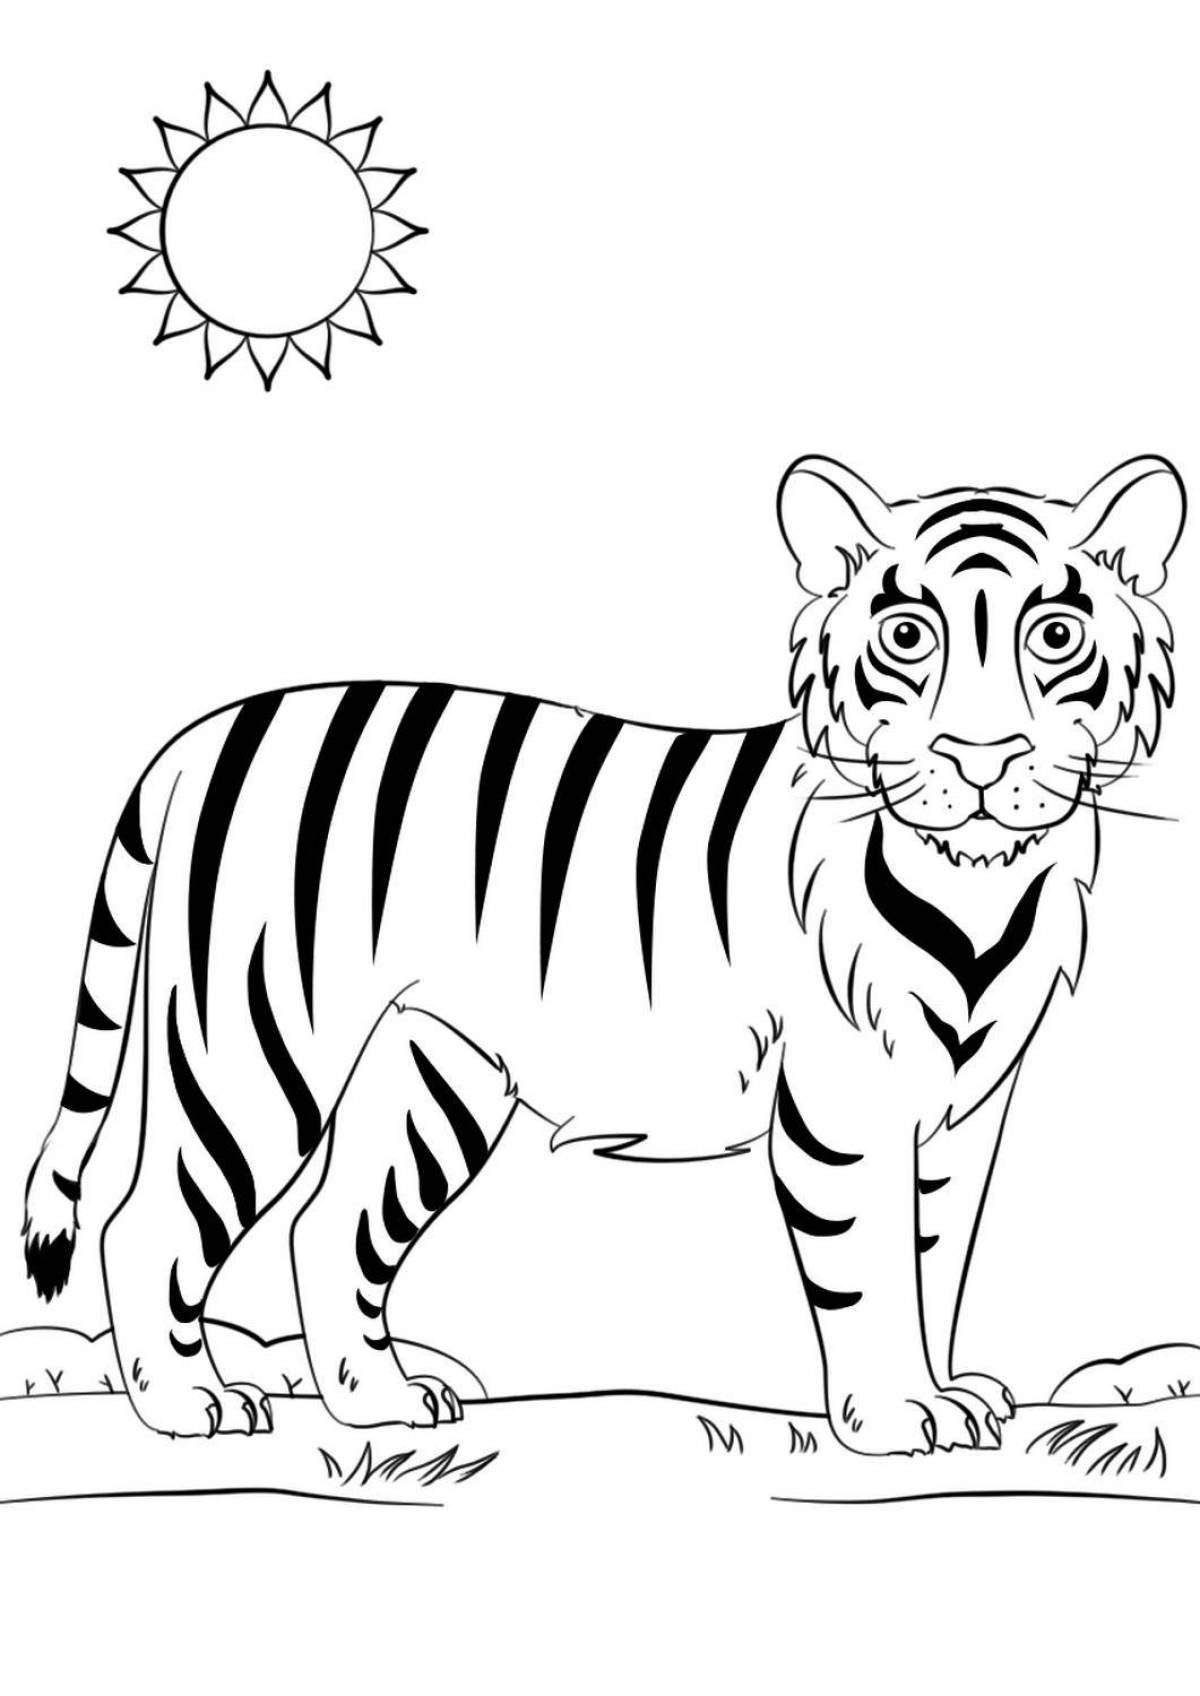 Glitter tiger coloring book for children 6-7 years old